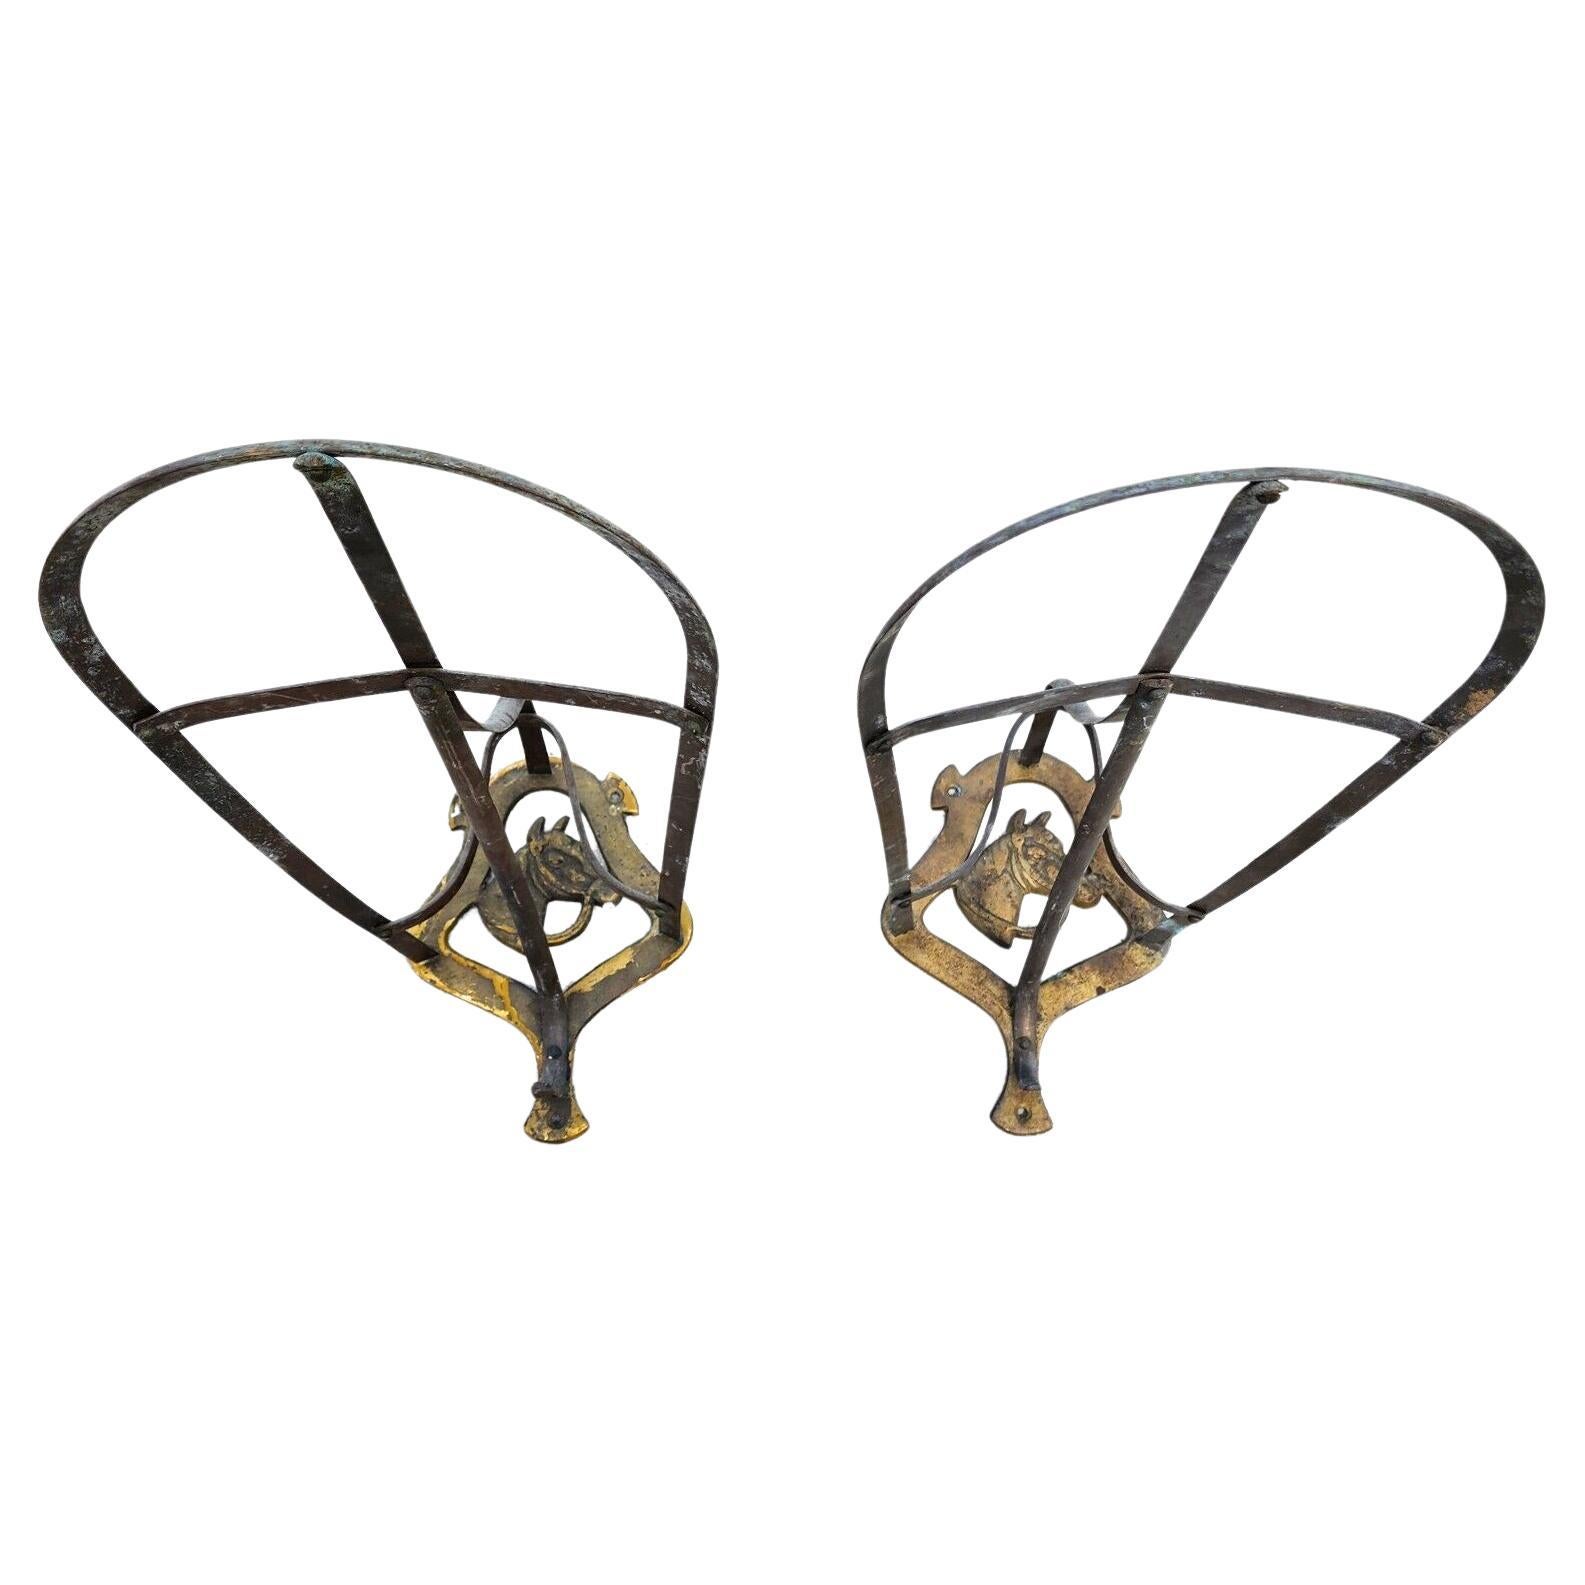 English Horse Saddle Wall Rack Solid Brass Vintage Pair